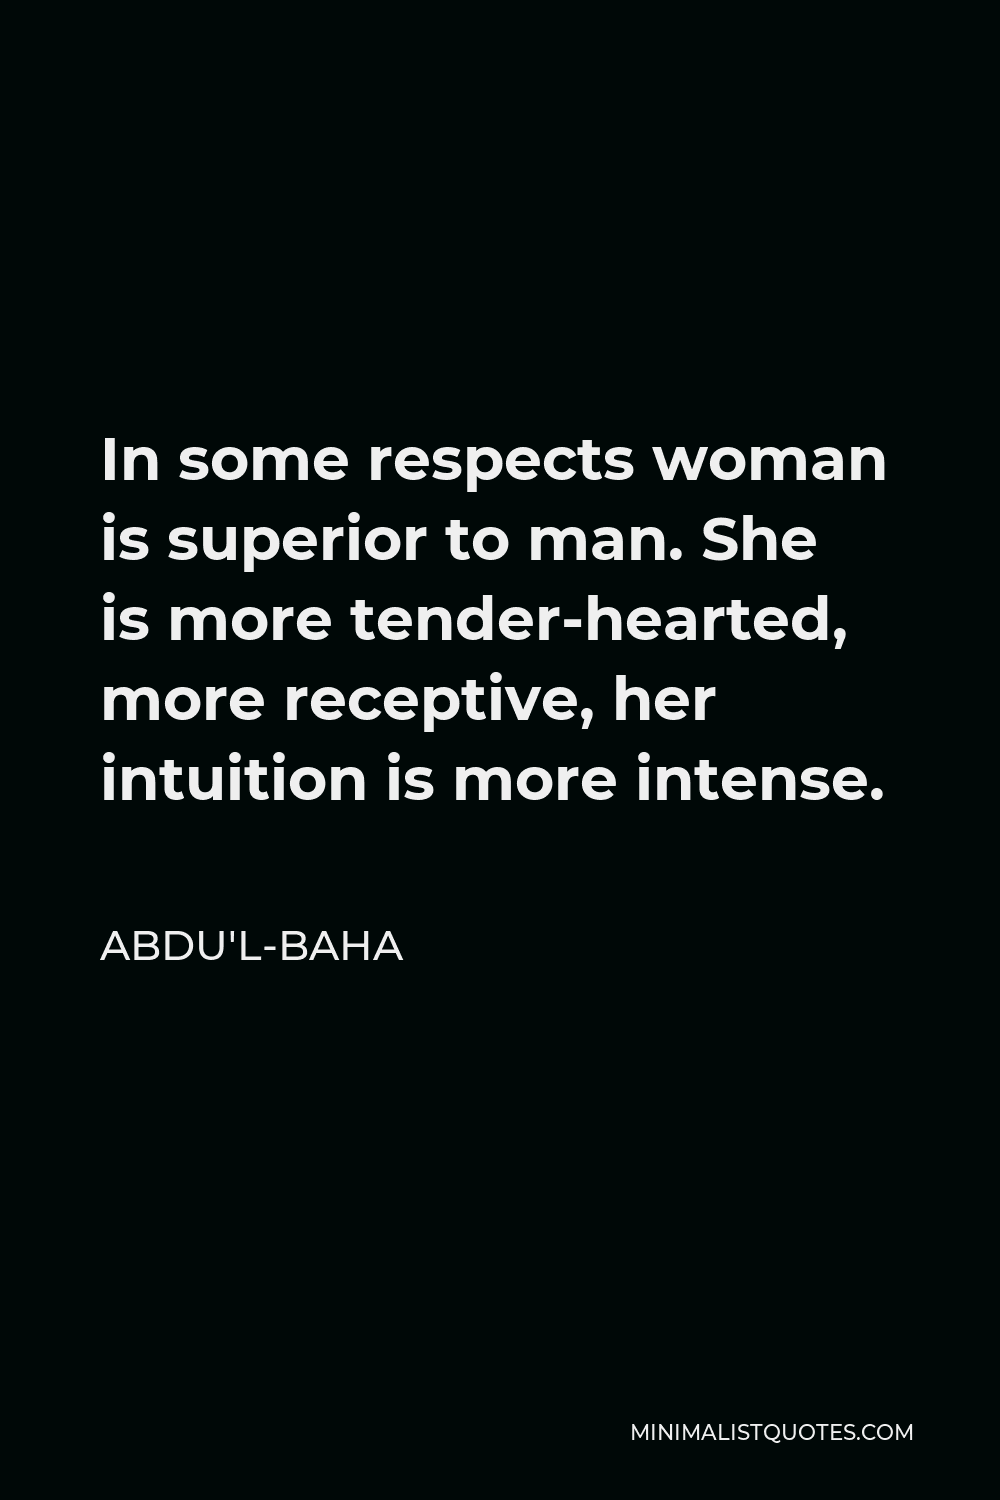 Abdu'l-Baha Quote - In some respects woman is superior to man. She is more tender-hearted, more receptive, her intuition is more intense.